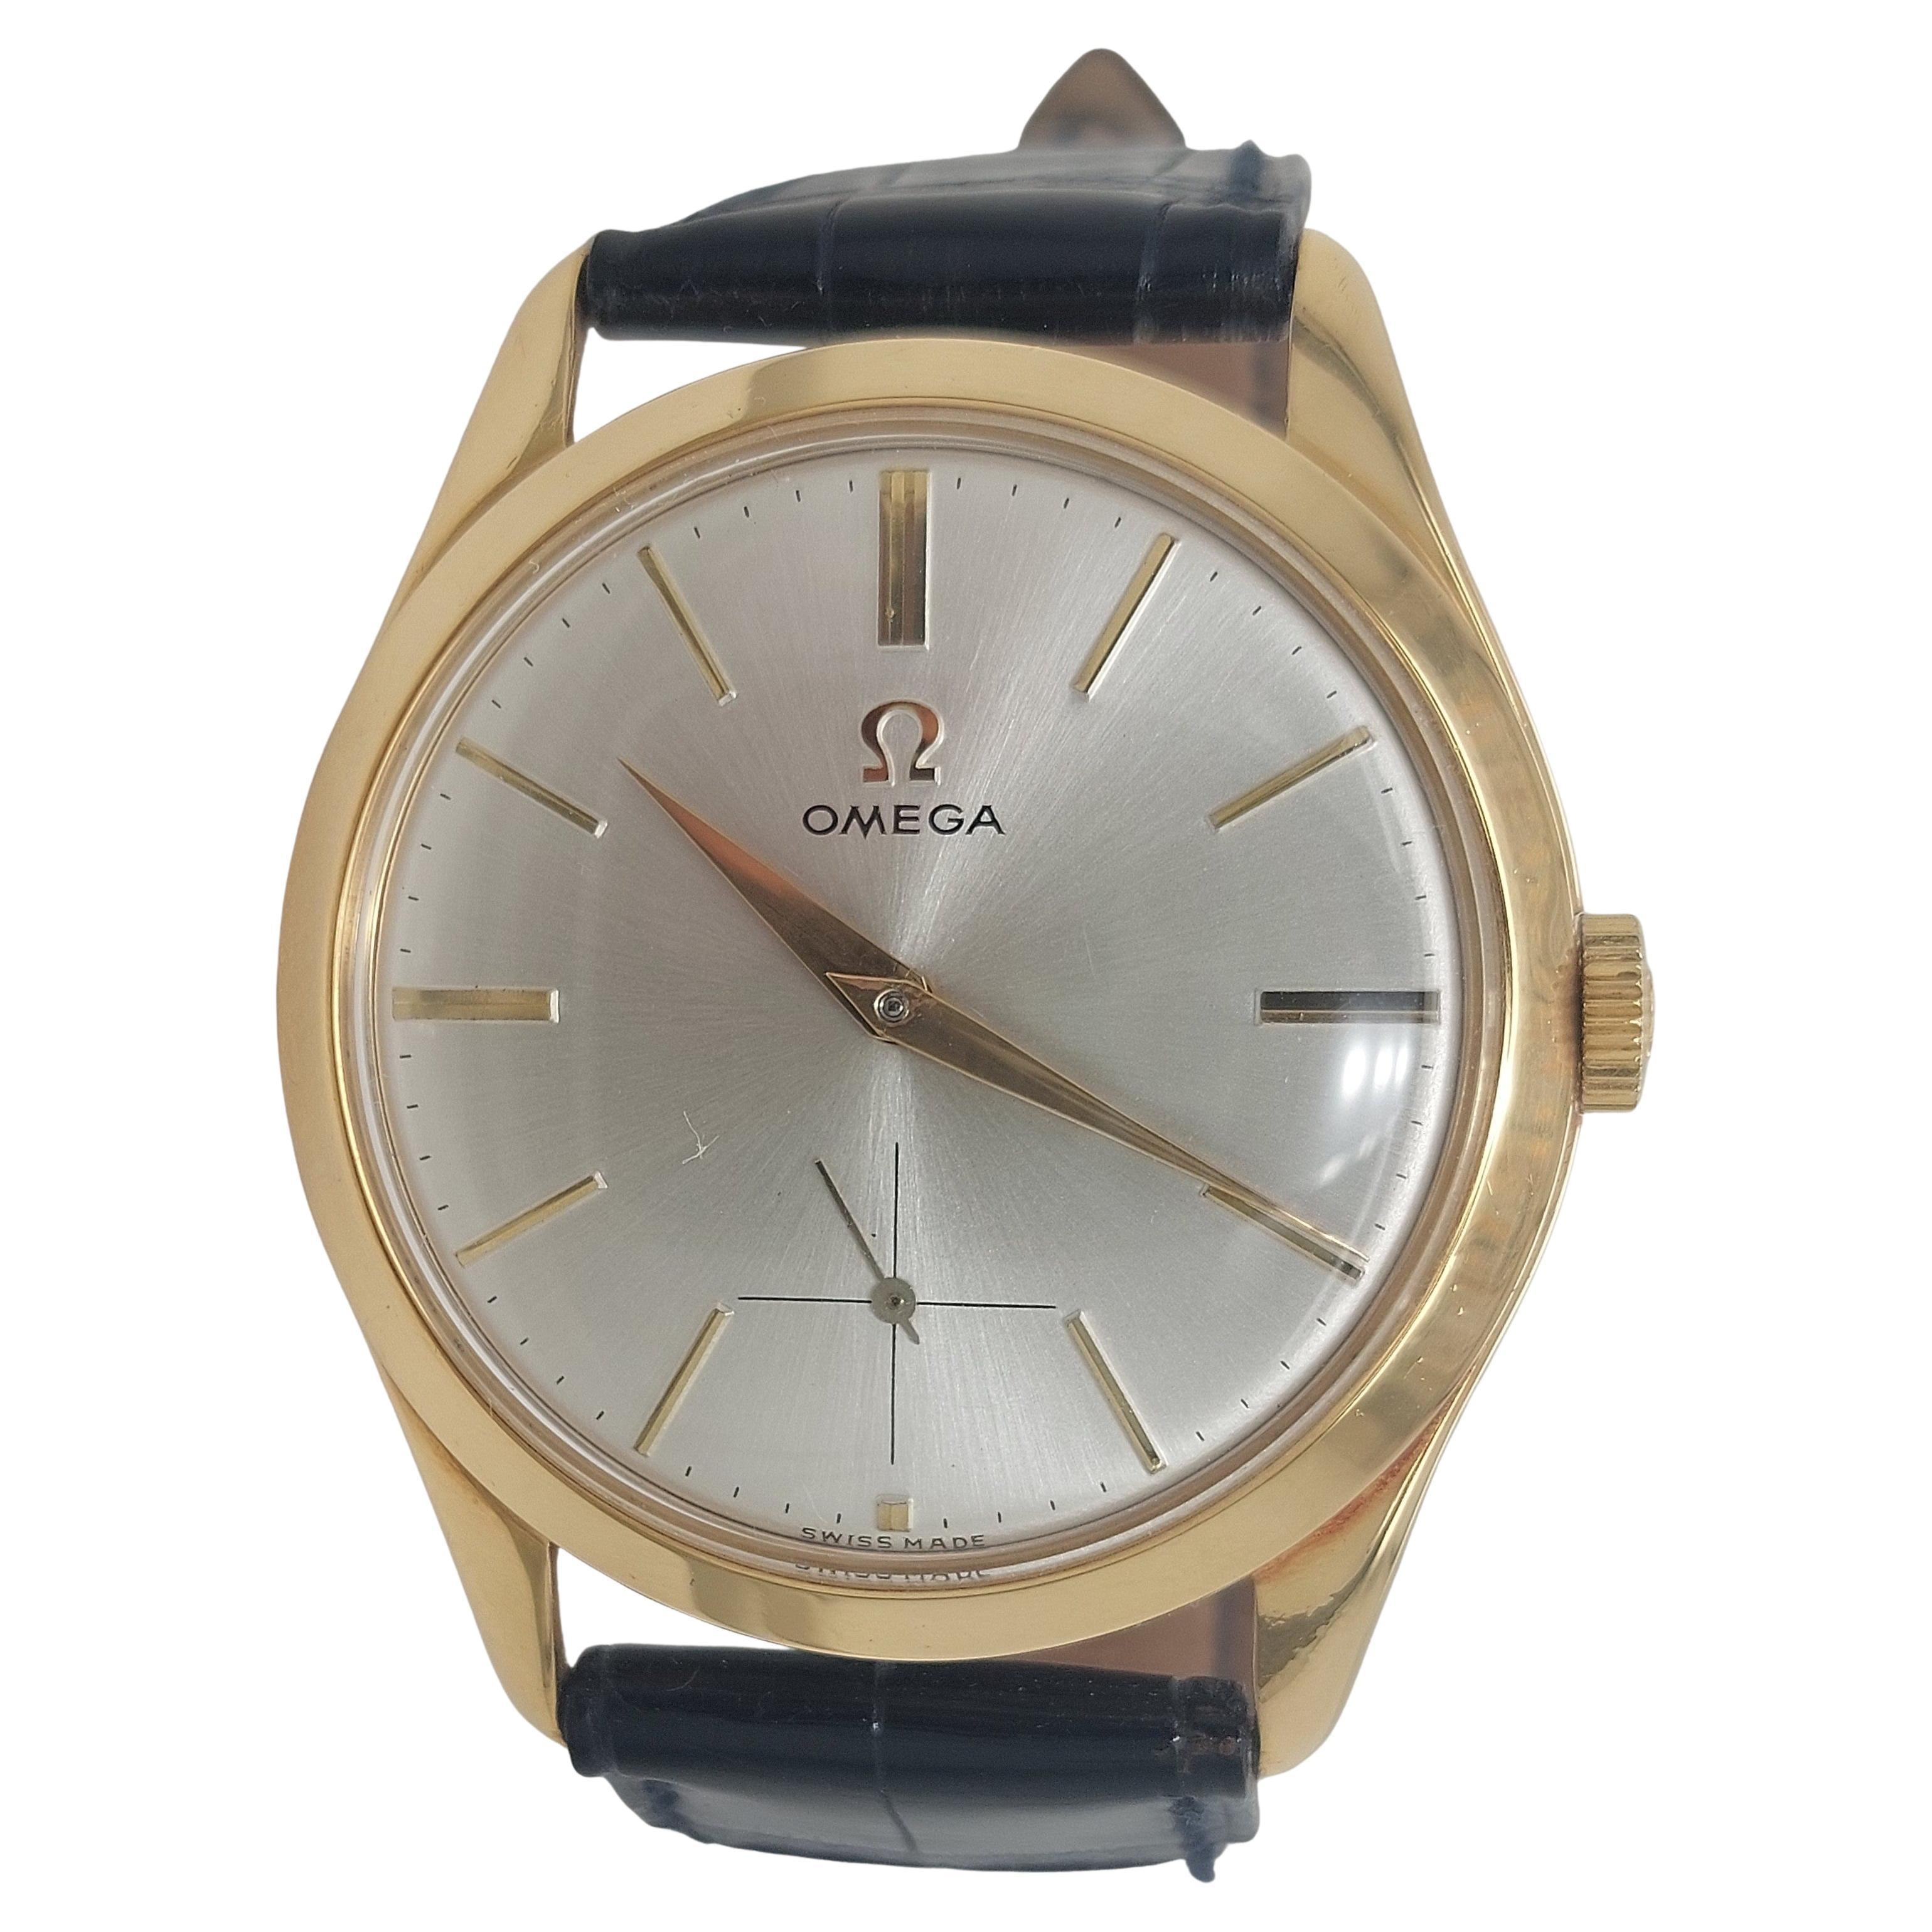 In Perfect Condition 18kt Yellow Gold Omega Reference 2619, Mechanical Movement